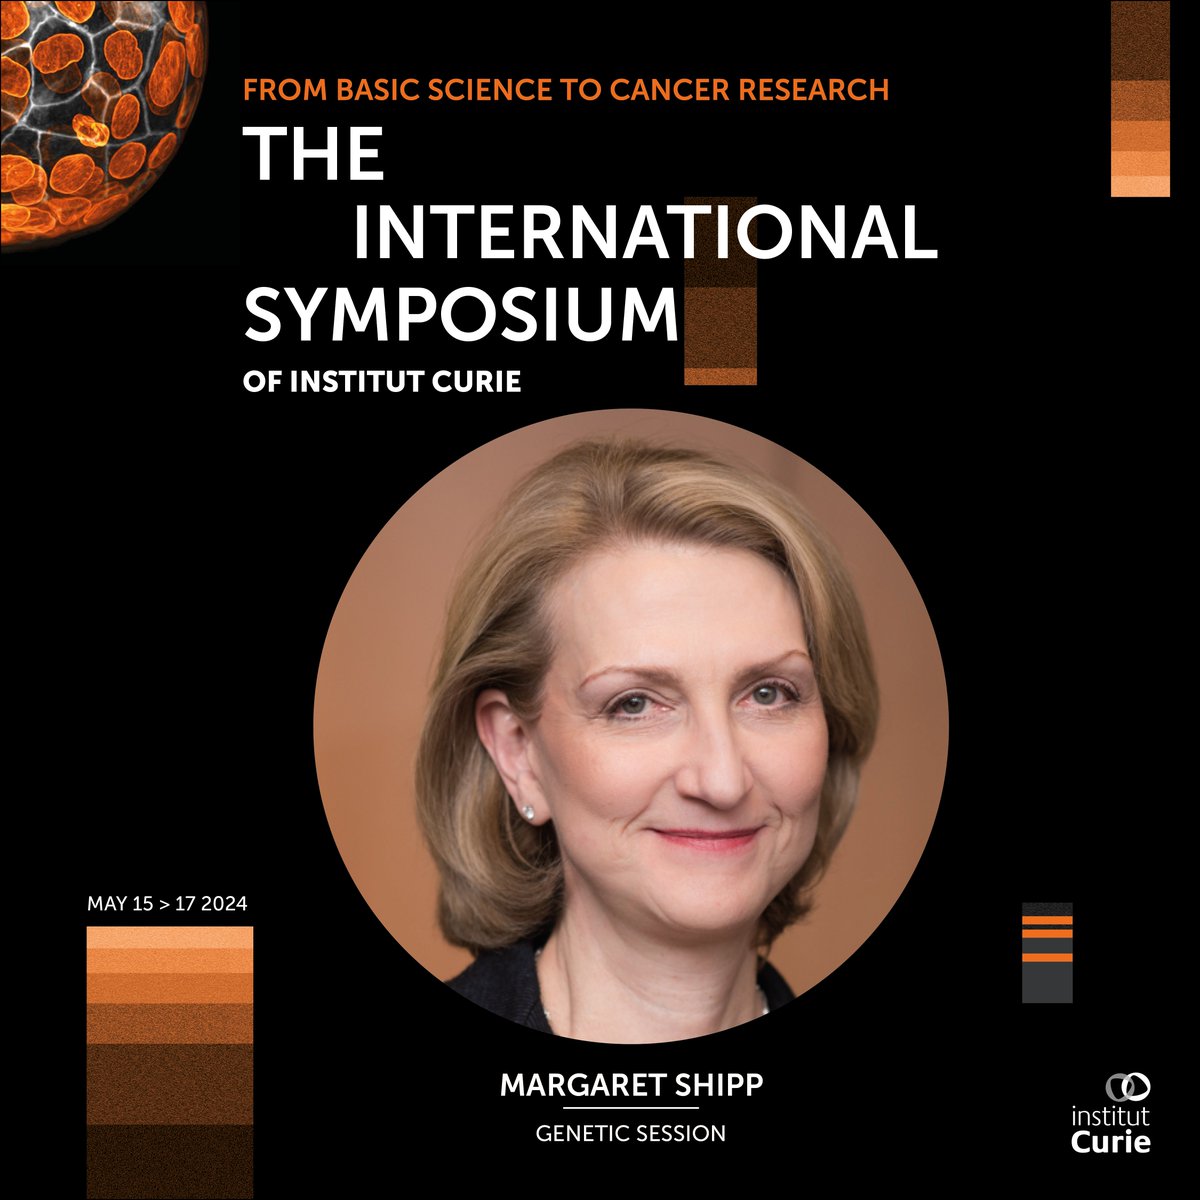 📢 Last days to join the #CurieSymposium and exchange about #CancerResearch with international experts such as Margaret Shipp @DanaFarber who will explore genetic signatures and immunologic escape mechanisms in lymphoid malignancies. ➡️ curiesymposium.fr/registration